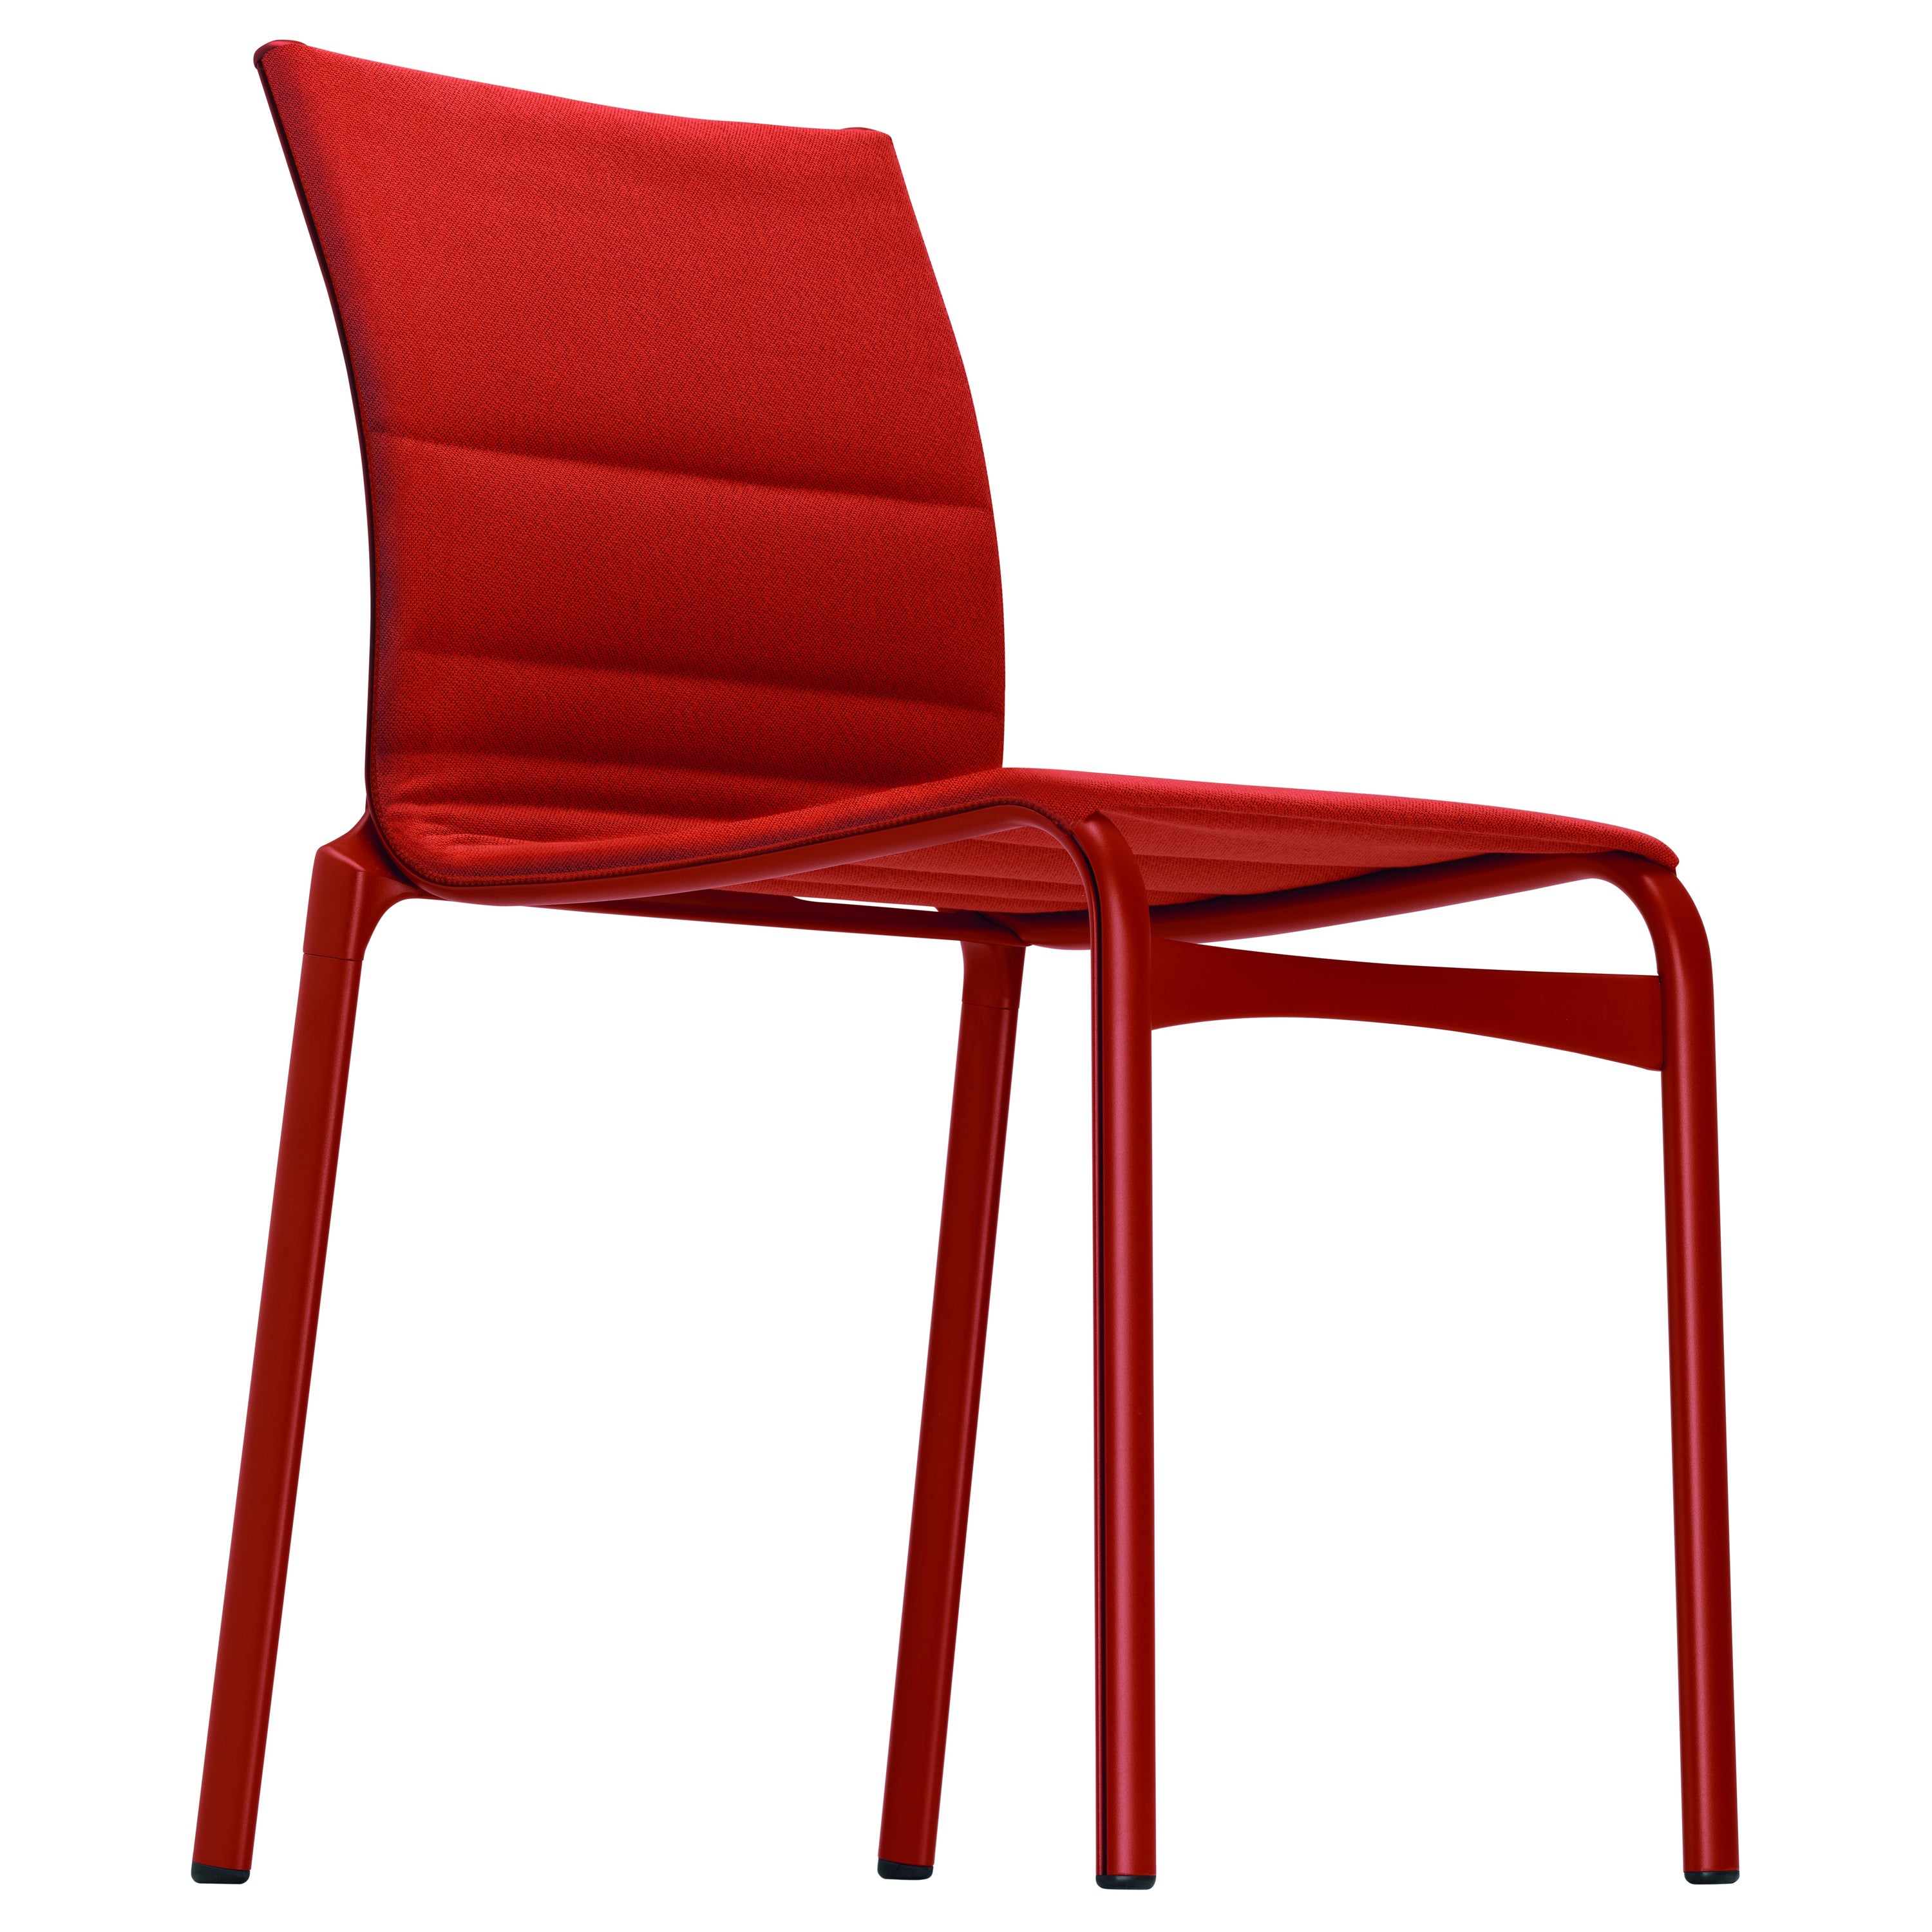 Alias Bigframe 44 Chair in Red SC02 Upholstery with Lacquered Aluminium Frame For Sale